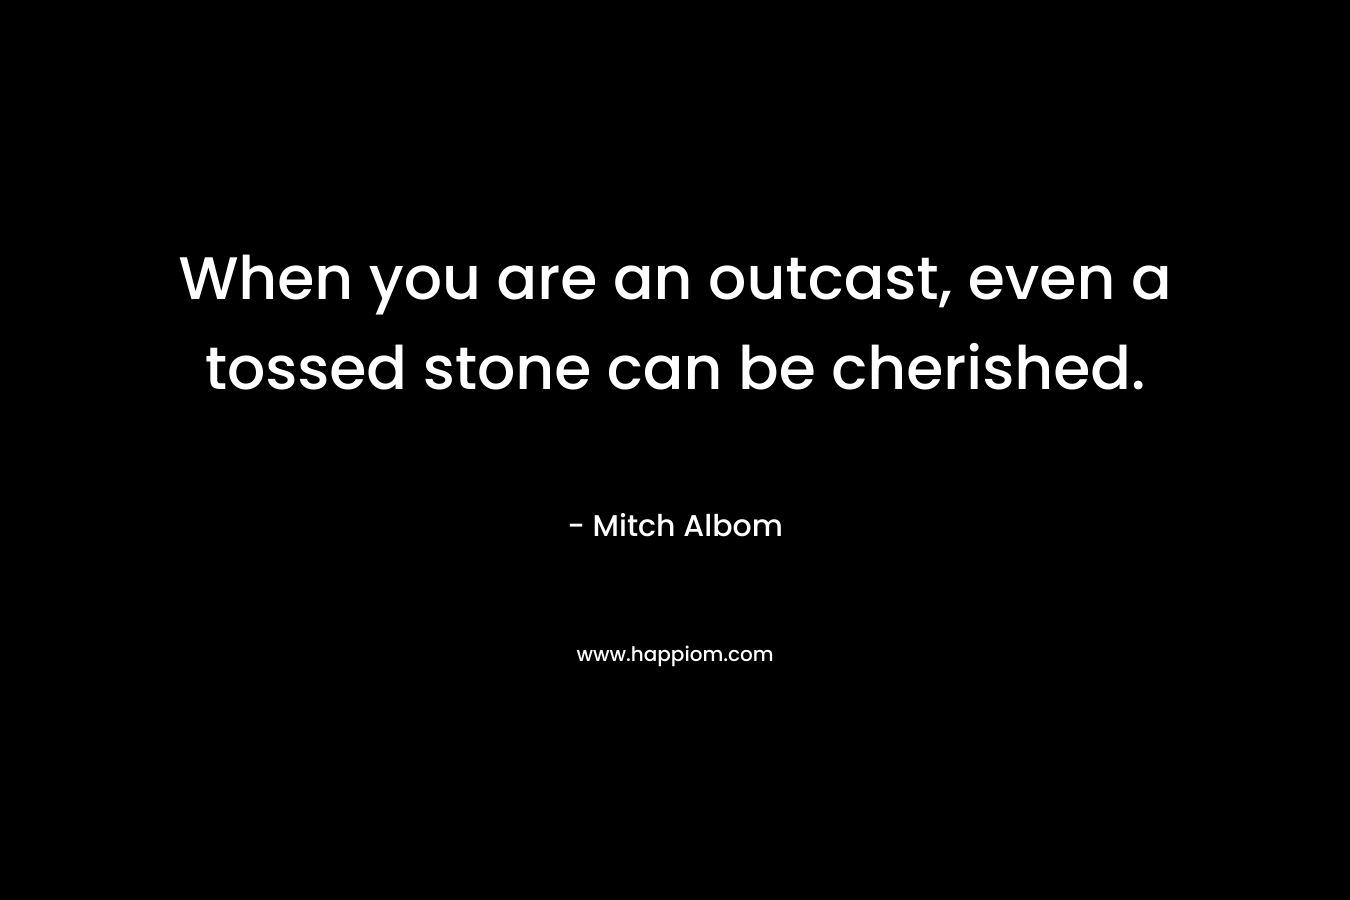 When you are an outcast, even a tossed stone can be cherished. – Mitch Albom